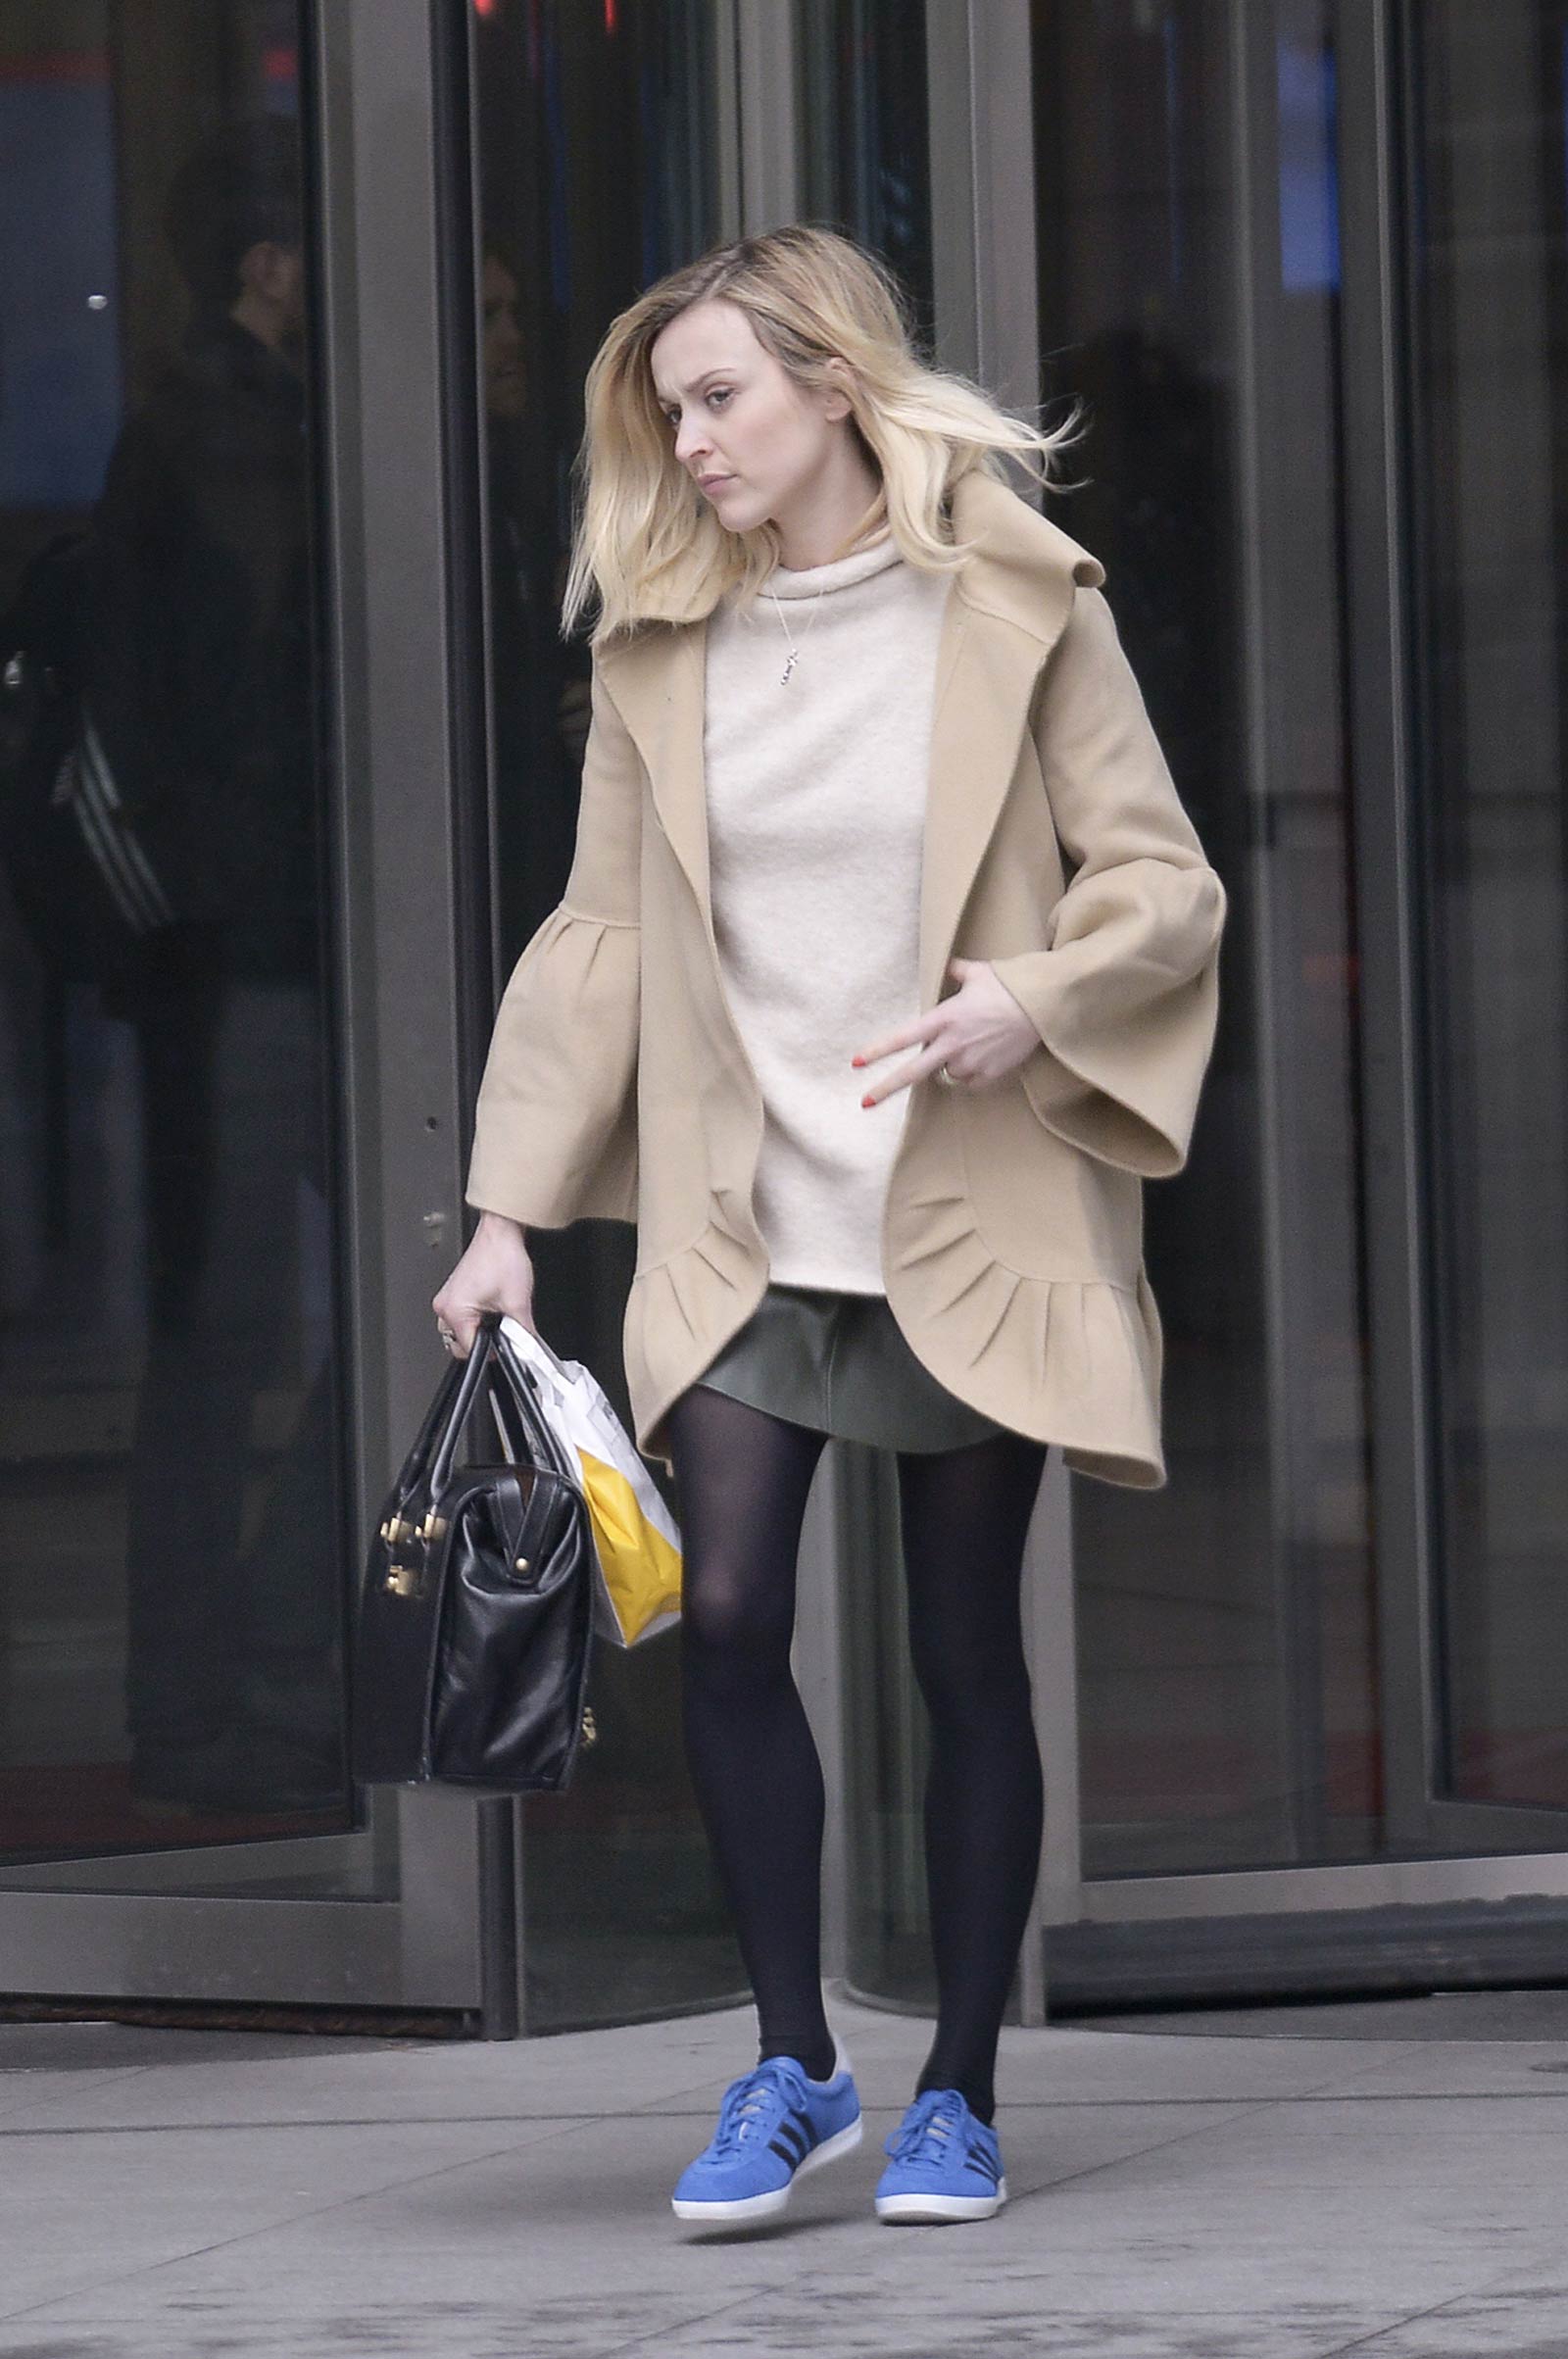 Fearne Cotton out and about in London